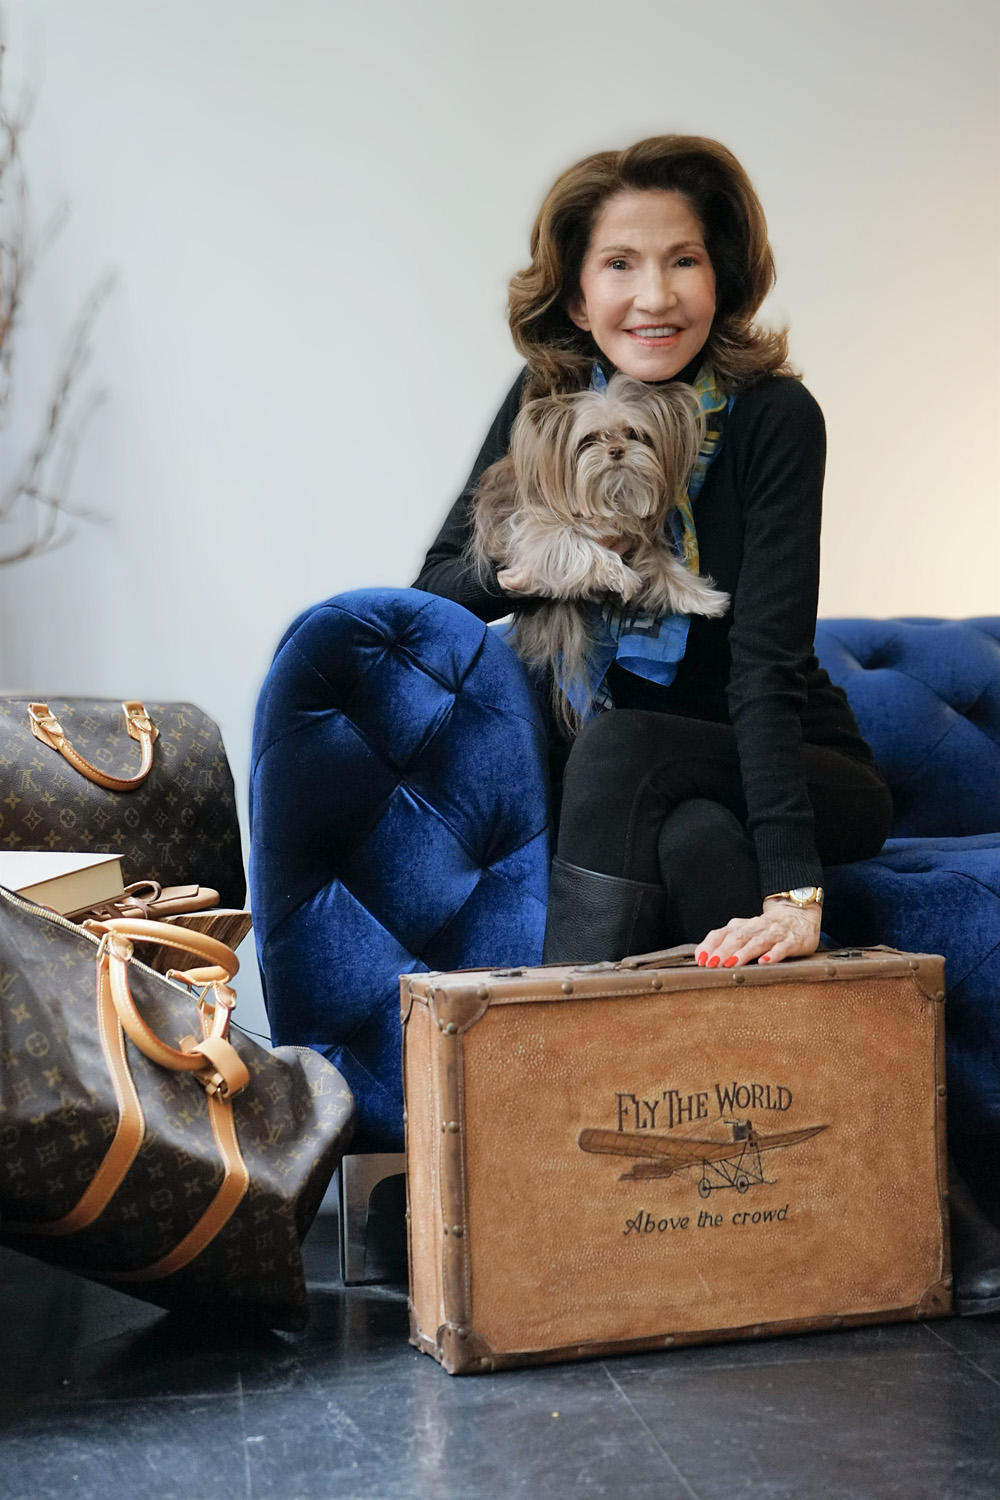 Gayle Martz sitting with a Yorkie on her lap and a Sherpa Bag beside them